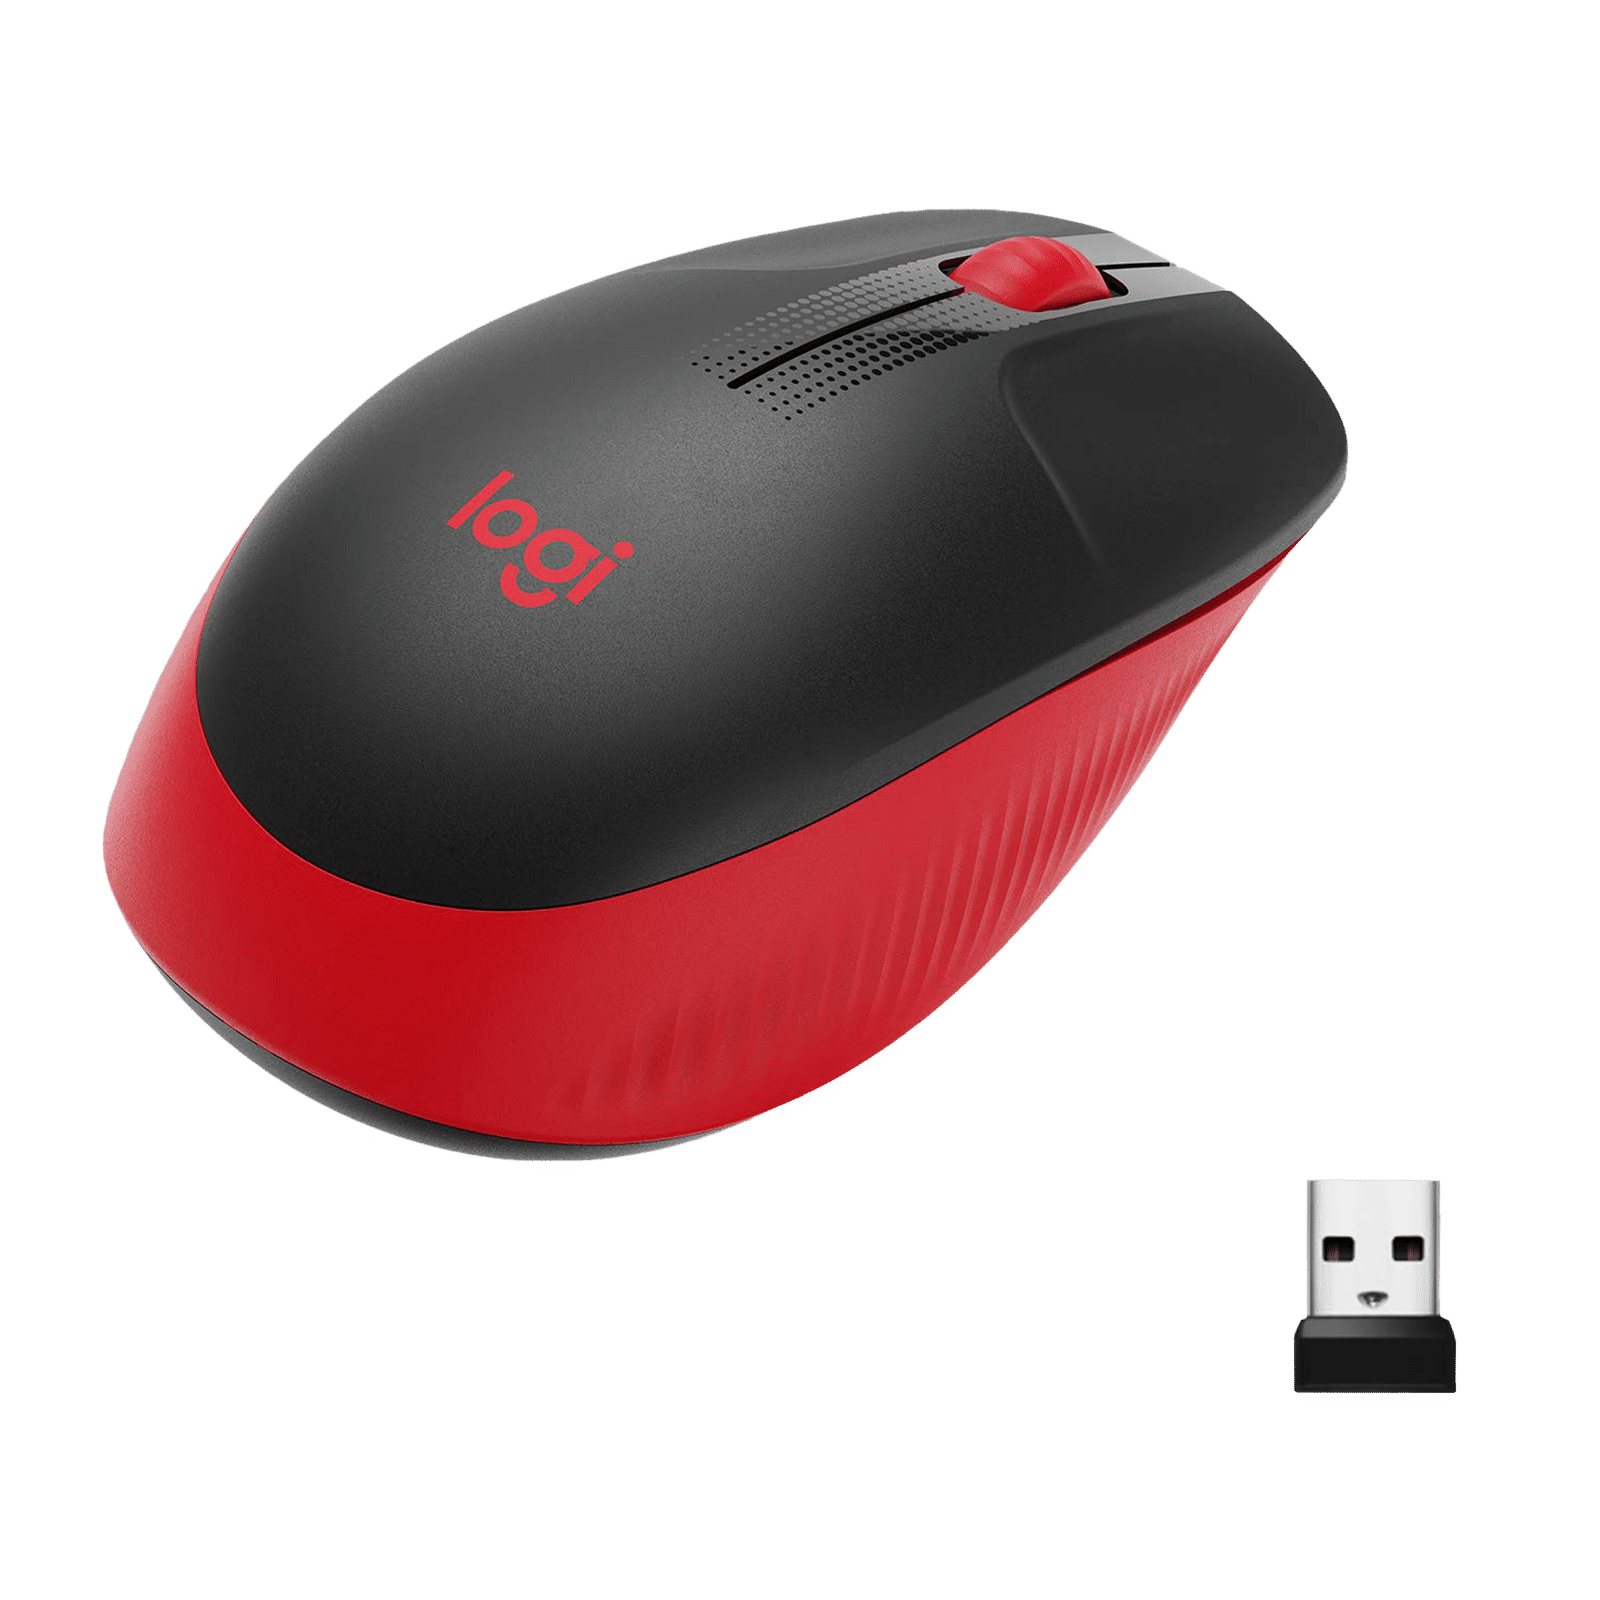 Buy Logitech M190 Wireless Optical Mouse (1000 DPI, Scooped Buttons, Red)  Online - Croma